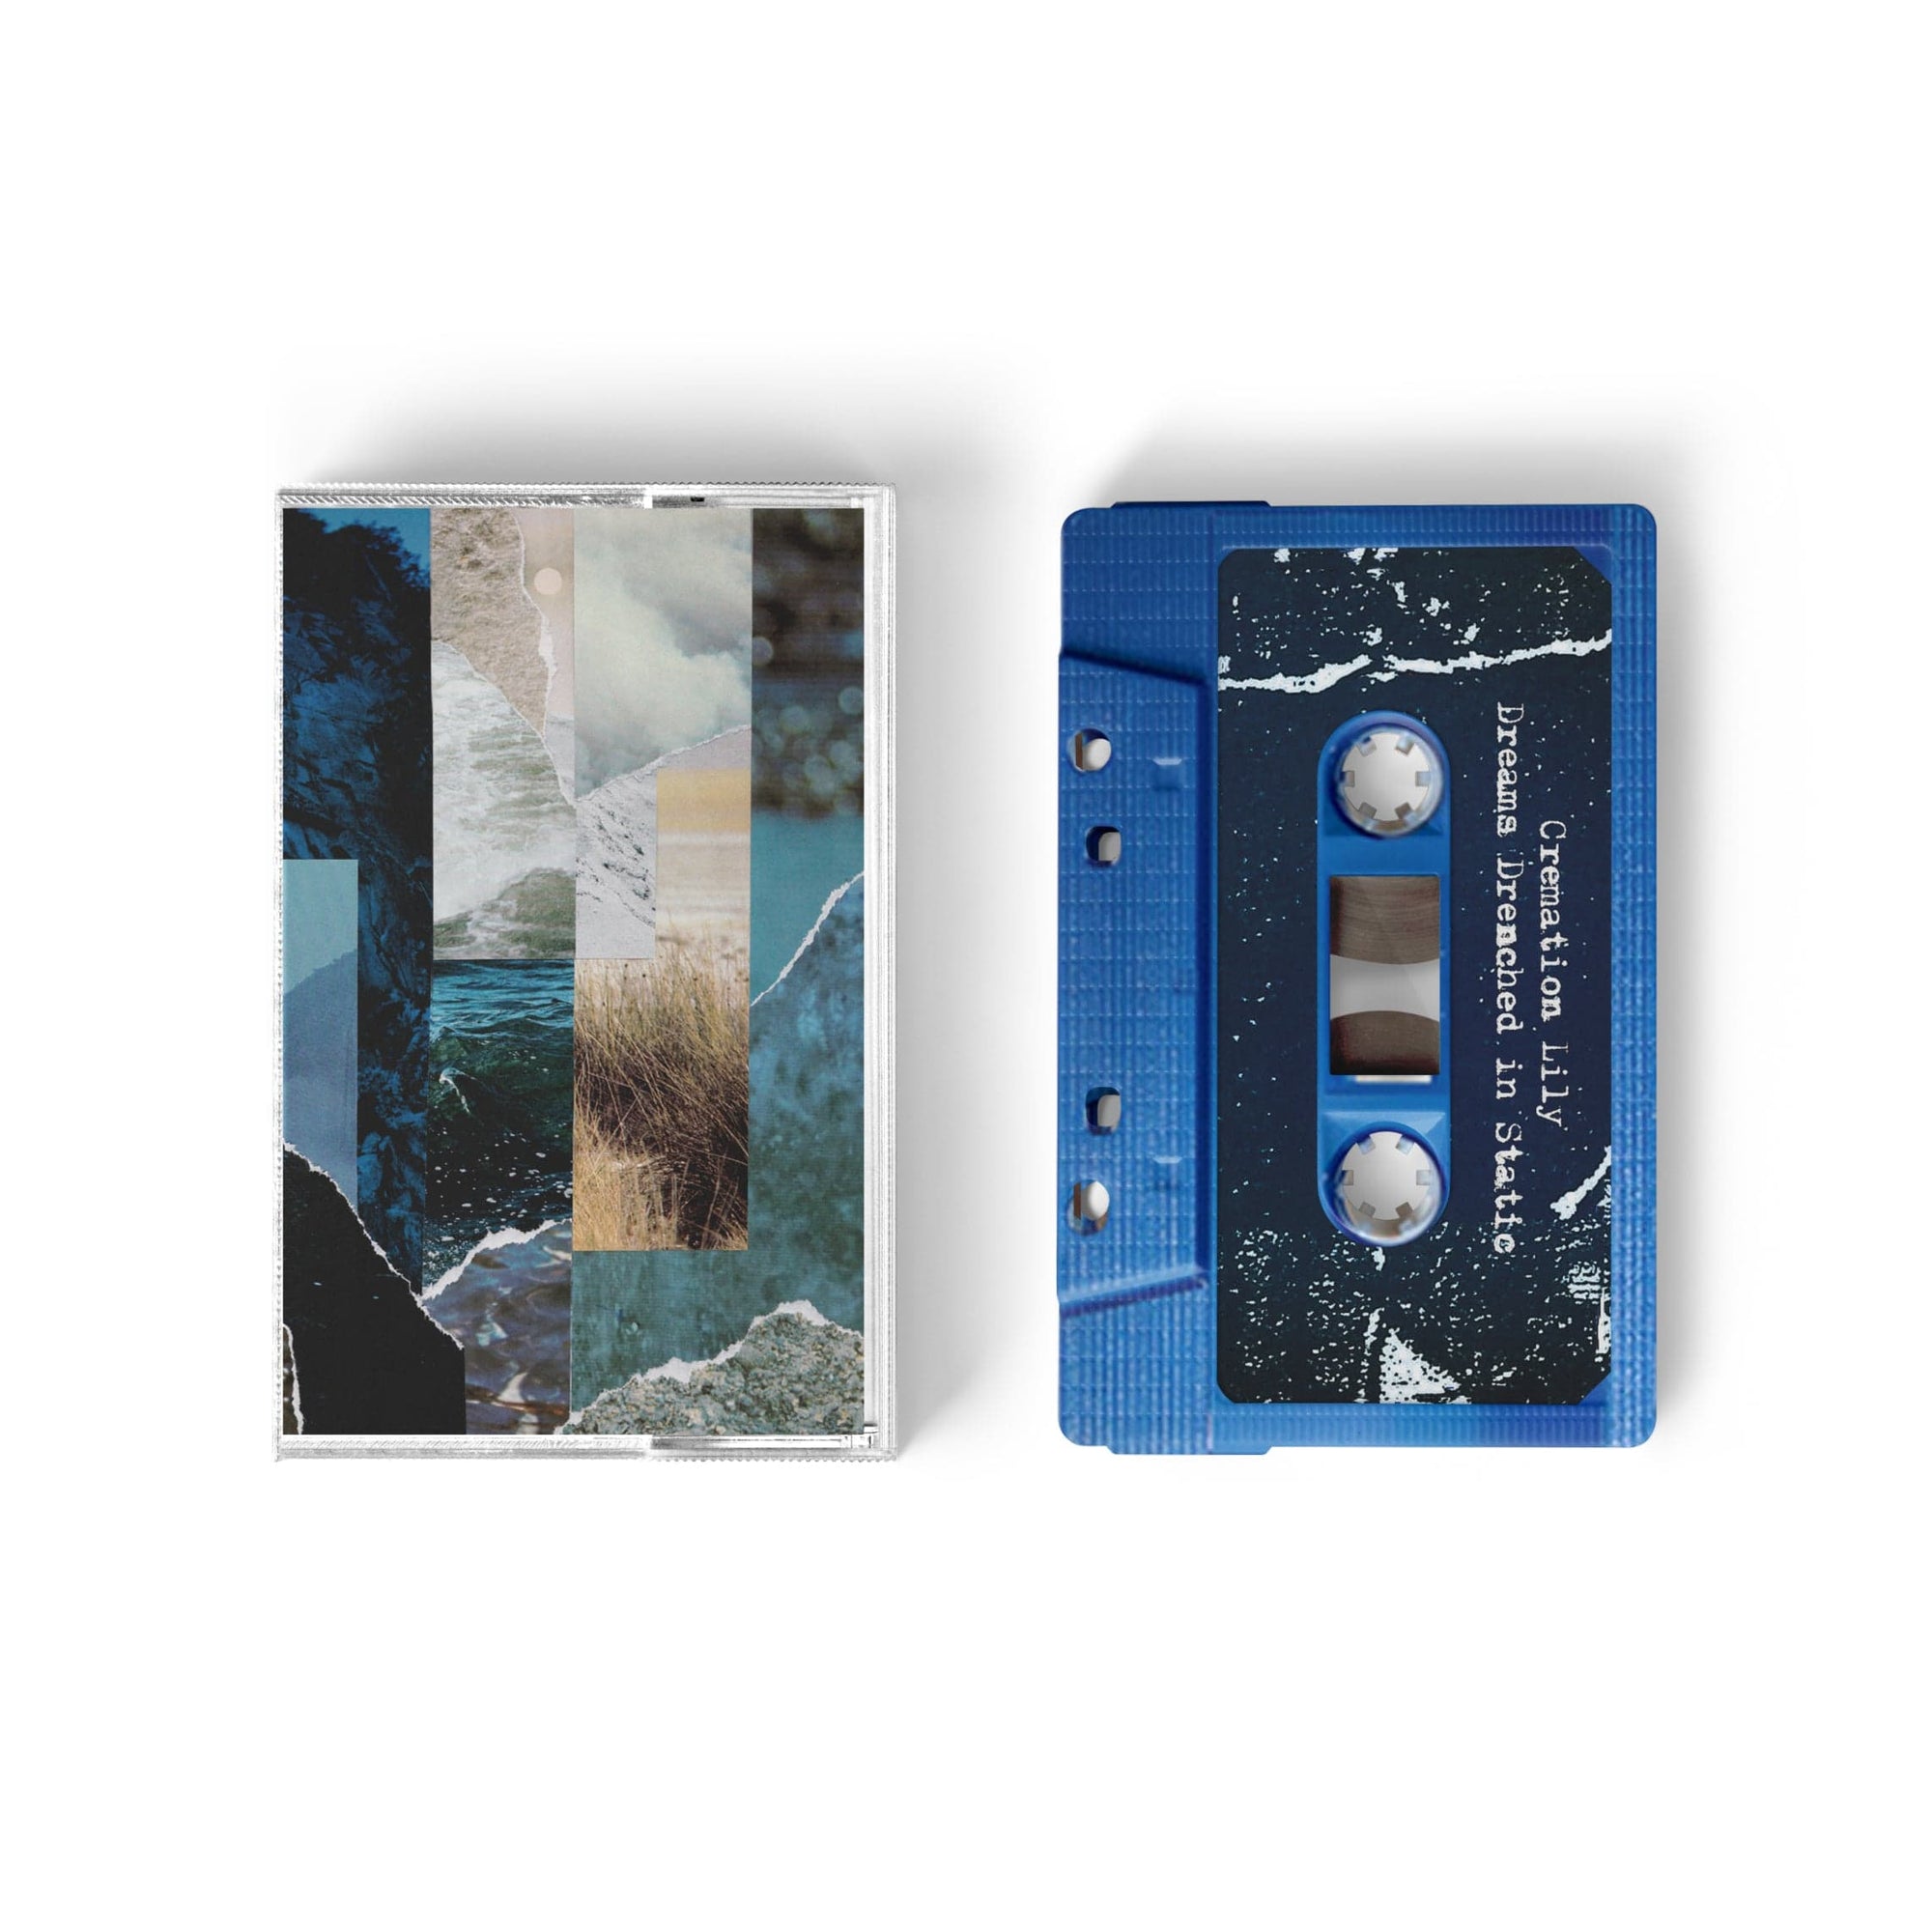 The Flenser Tapes Cremation Lily "Dreams Drenched in Static" Tape